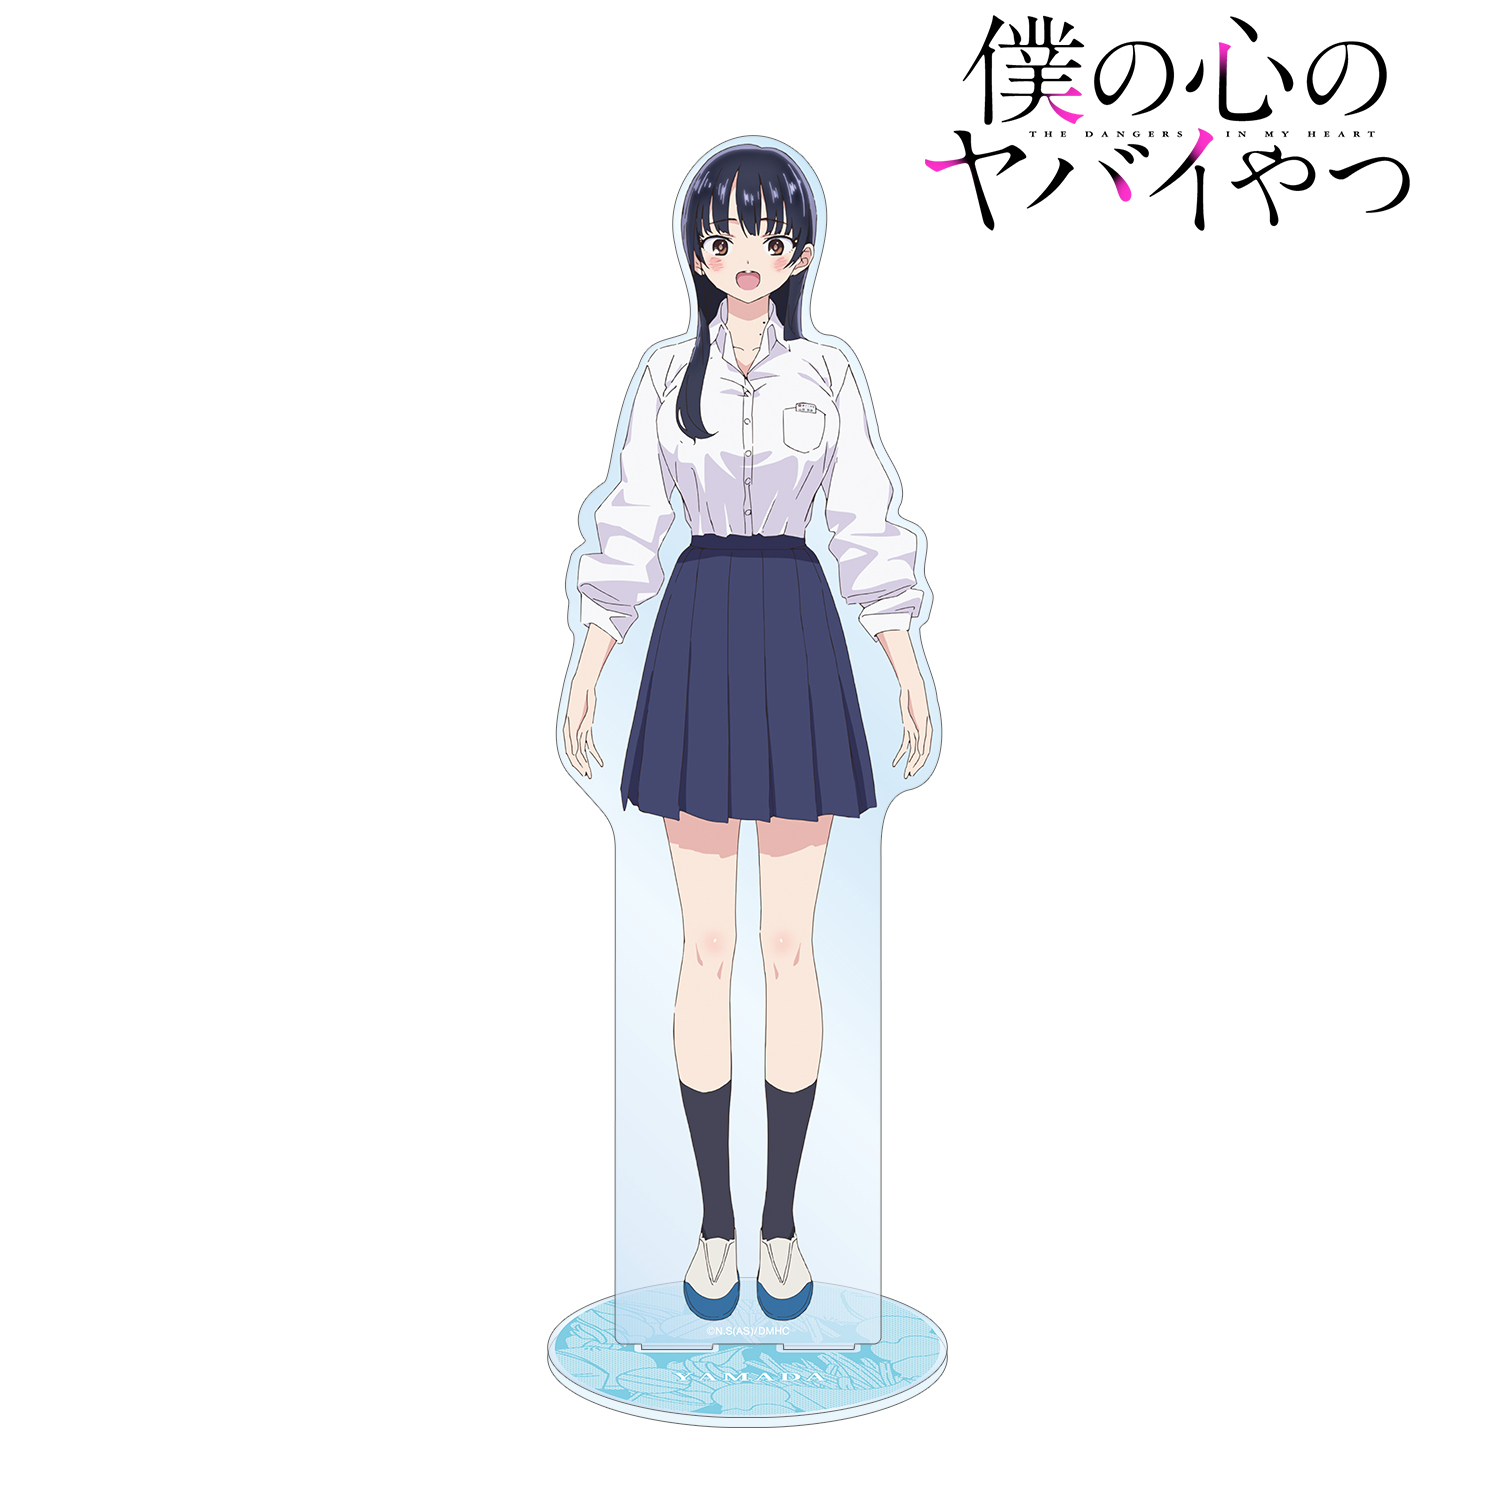 [Pre-order] "The Dangers in My Heart" Yamada Anna Extra Large Acrylic Stand